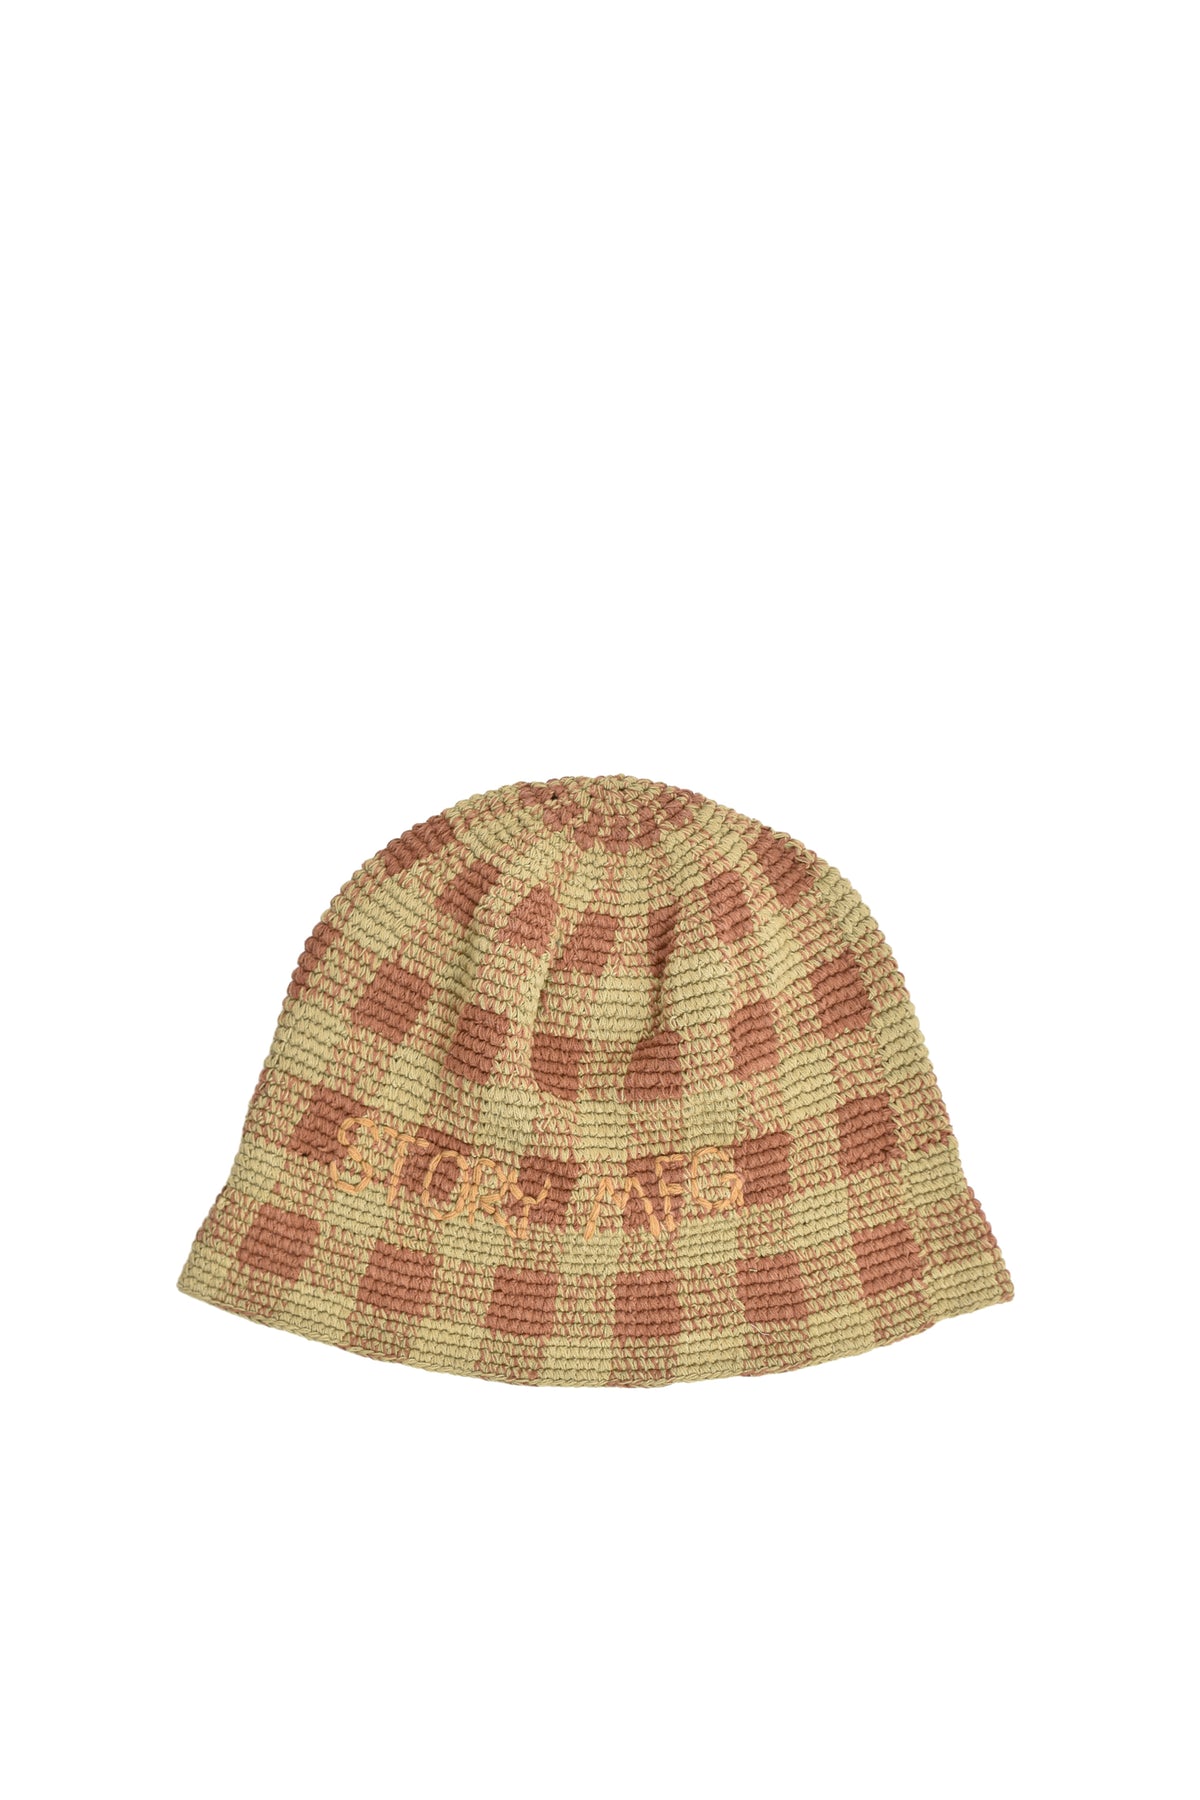 STORY mfg. BREW HAT / FOREST